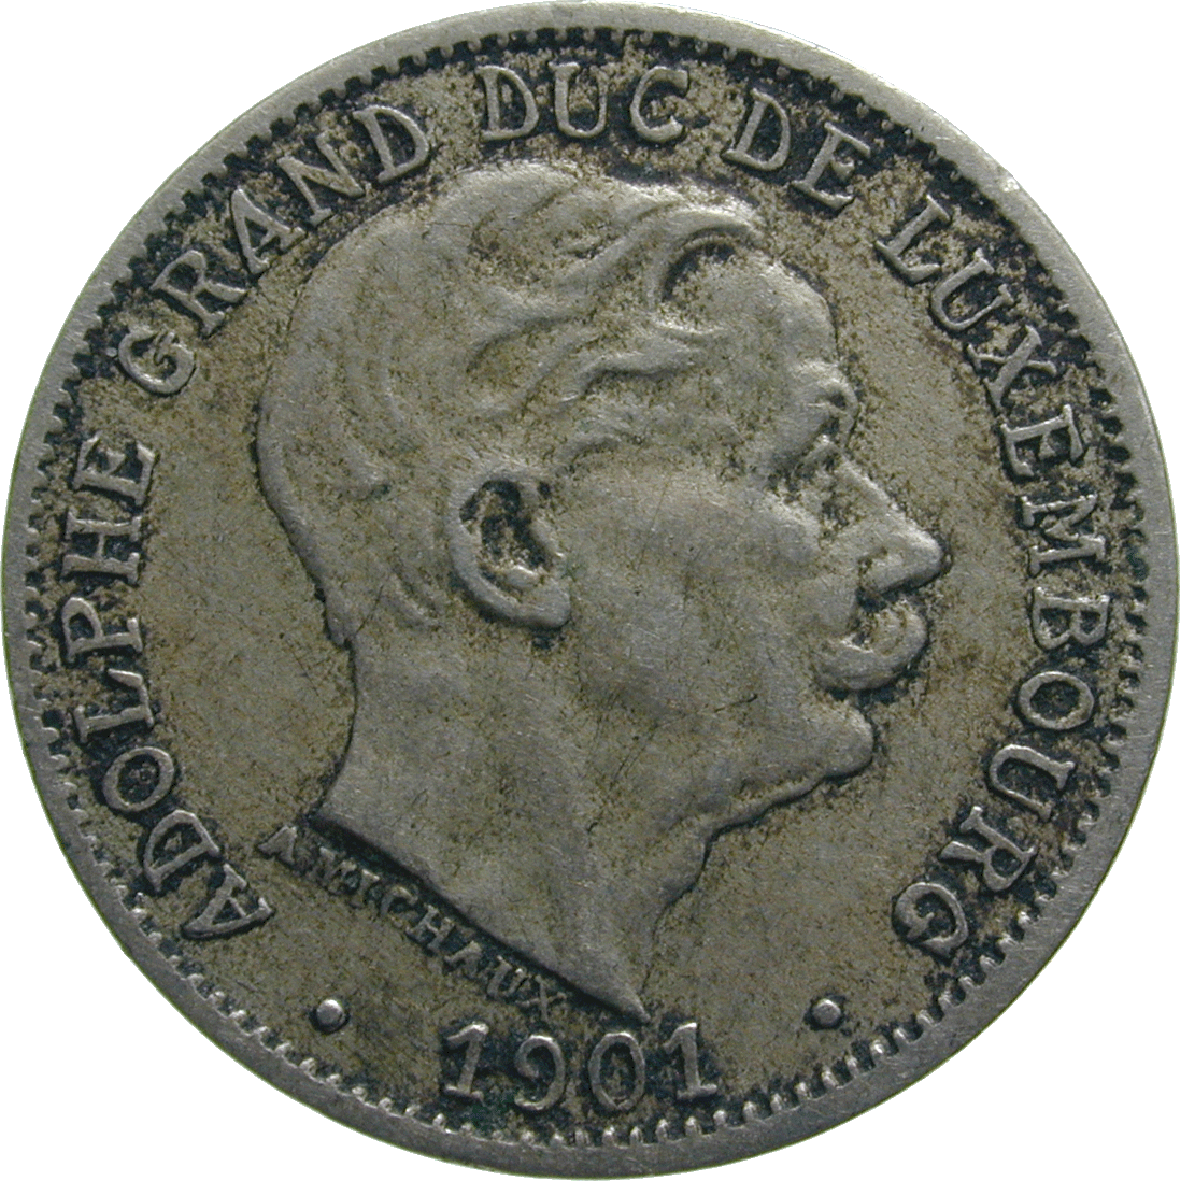 Grand Duchy of Luxembourg, Adolphe, 5 Centime 1901 (obverse)